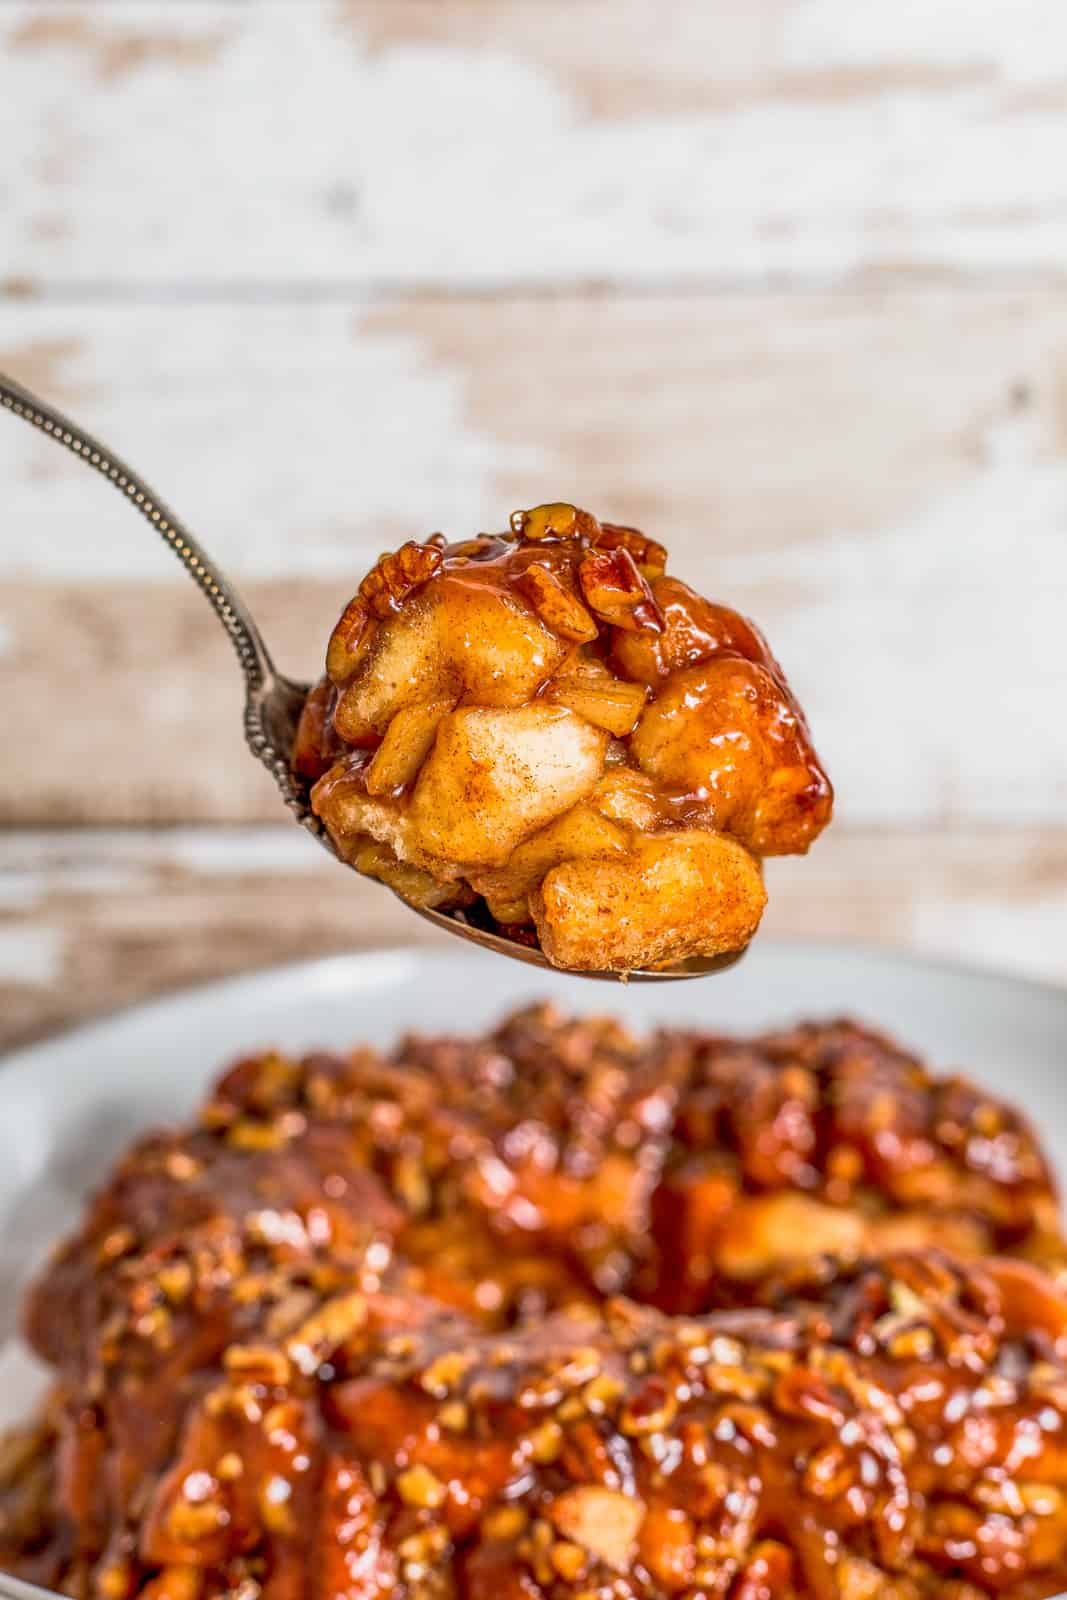 Spoon holding up some of the Apple Monkey Bread